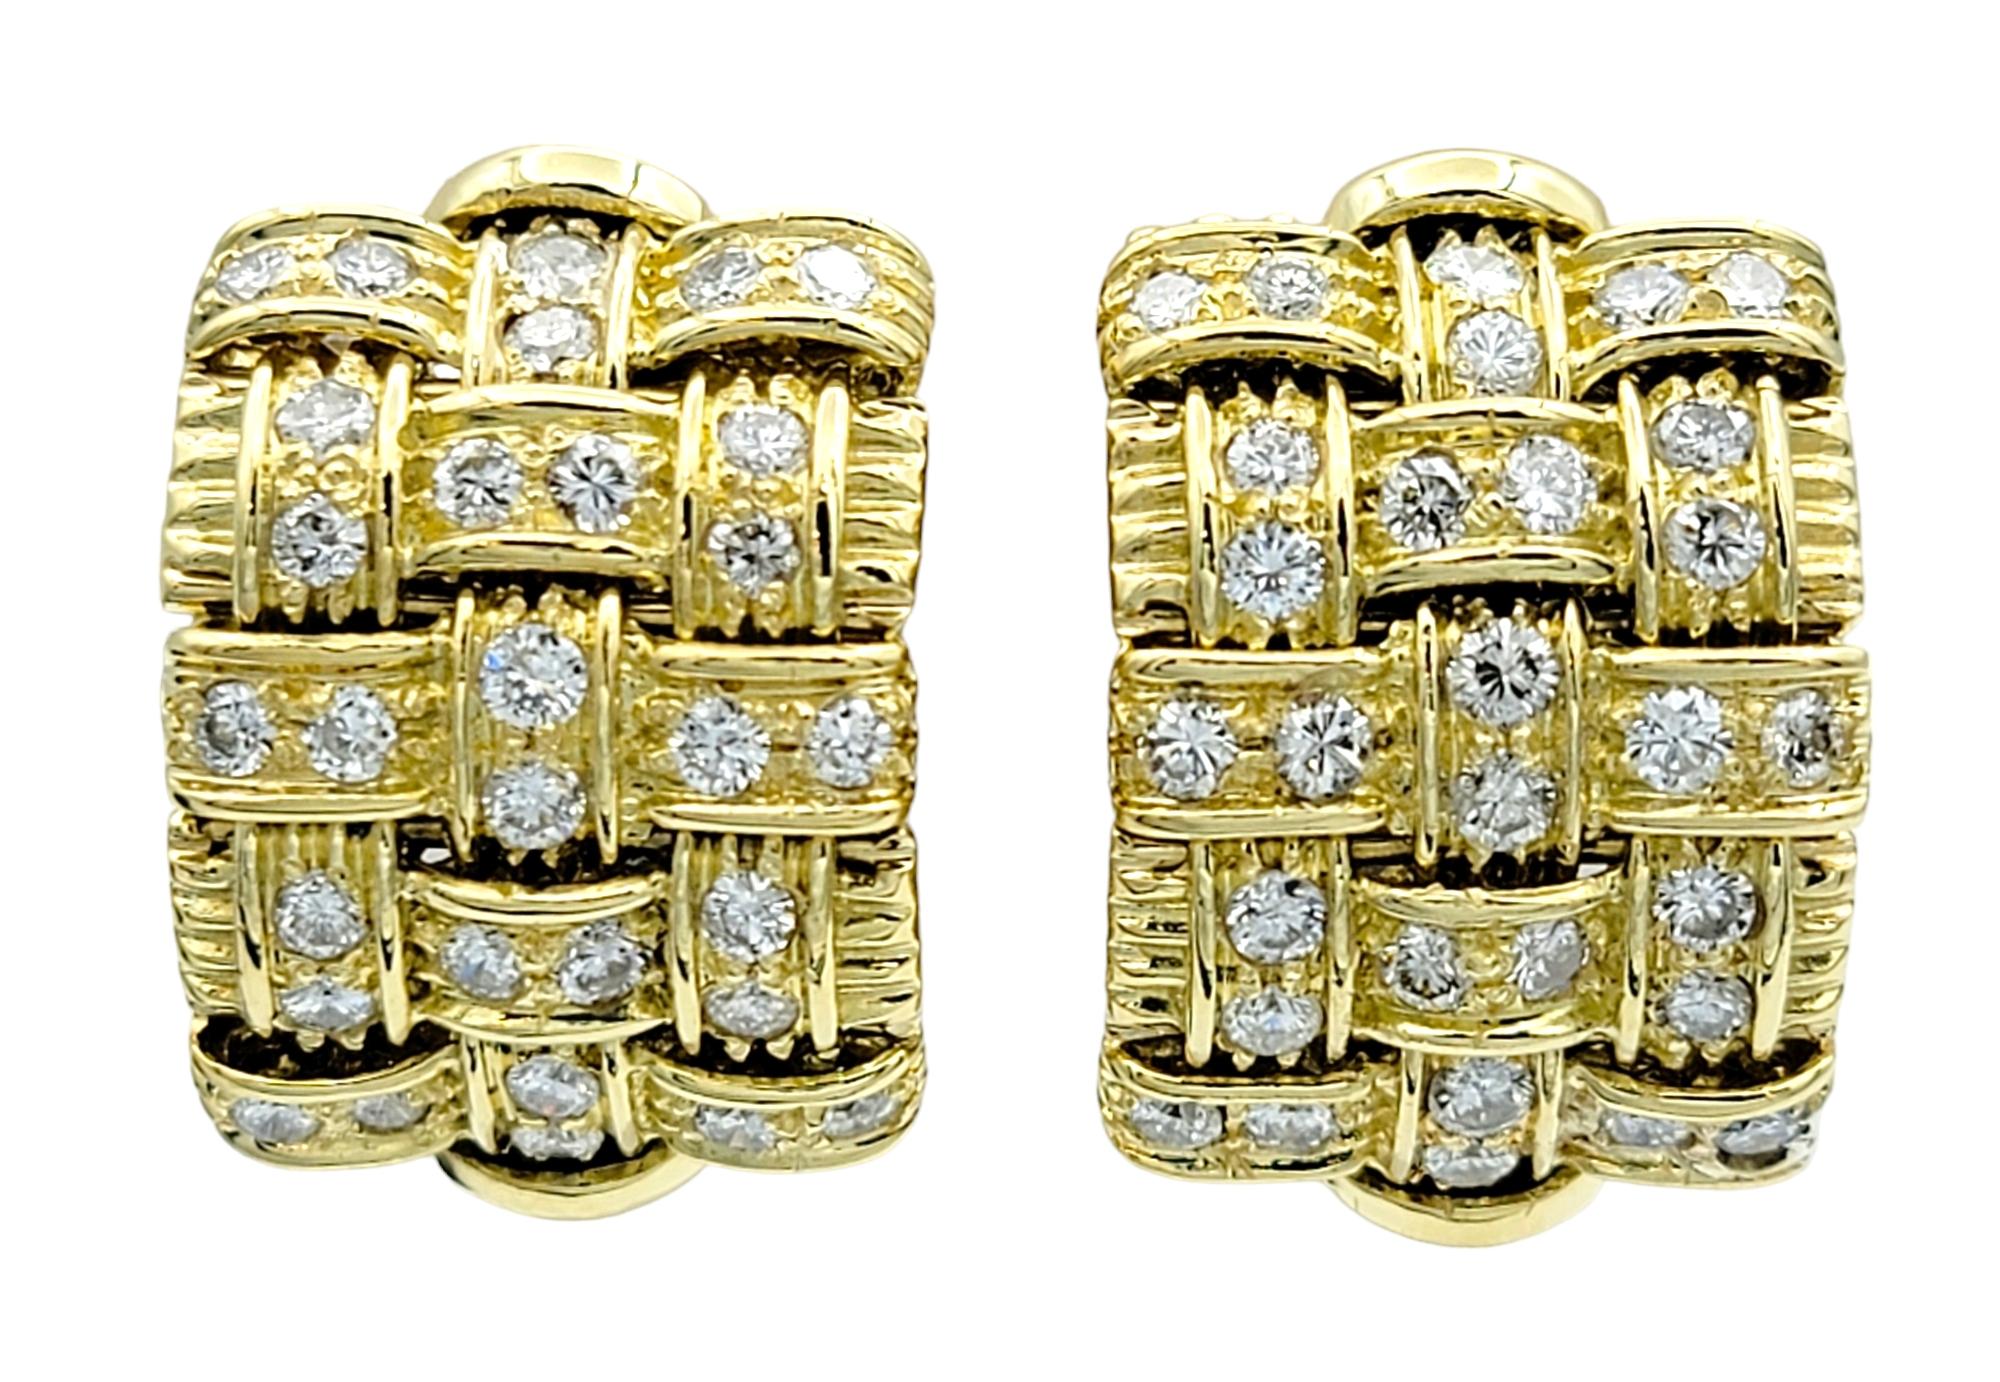 These elegant diamond earrings, set in 18 karat yellow gold, feature an omega back closure for a secure fit and comfortable wear. The standout feature of these earrings is their intricate woven design, creating a sense of depth and texture, allowing